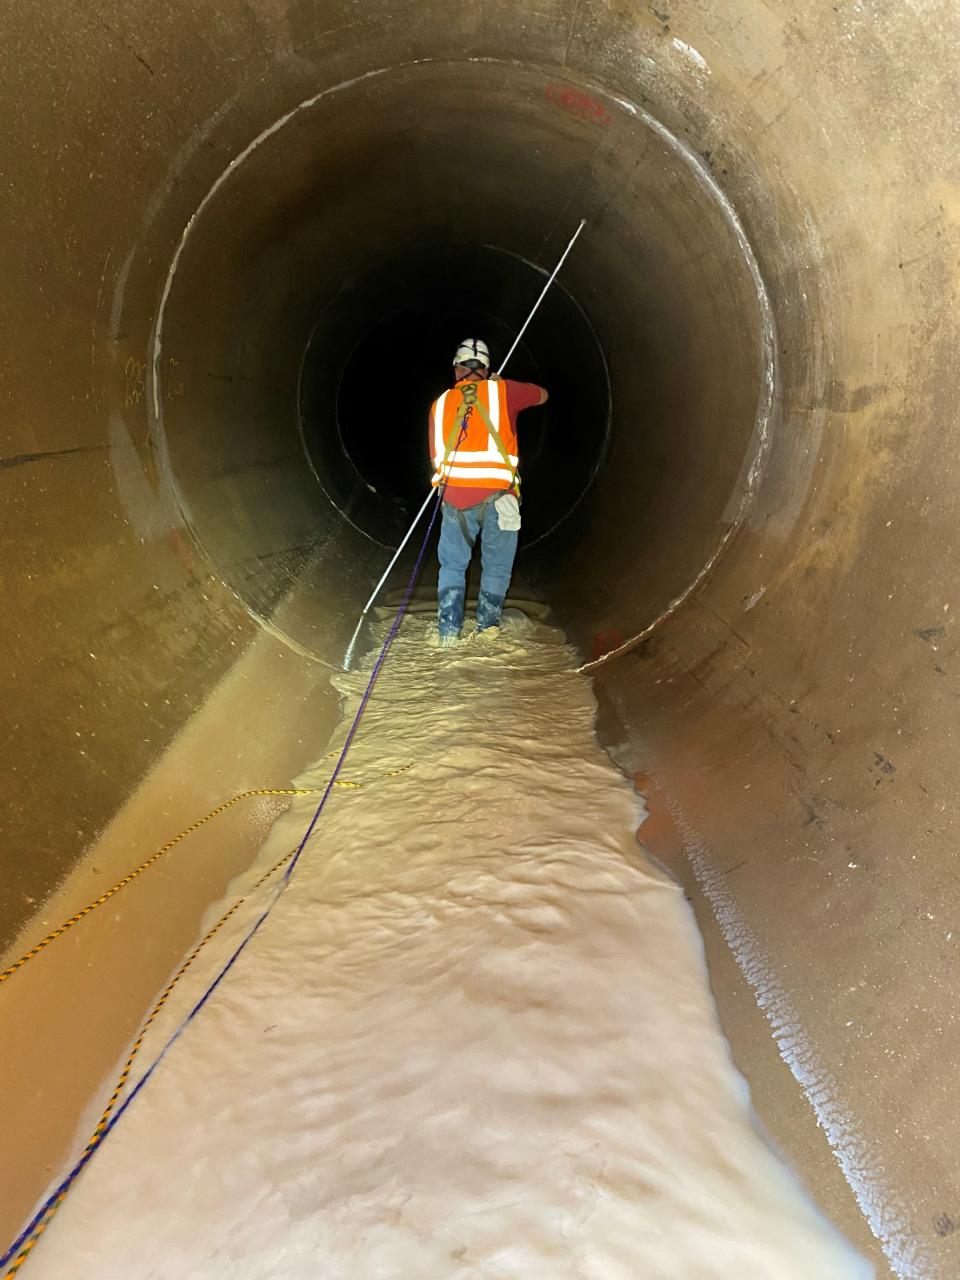 A member of the Engineering Inspection team at work in the 120-inch pipe.